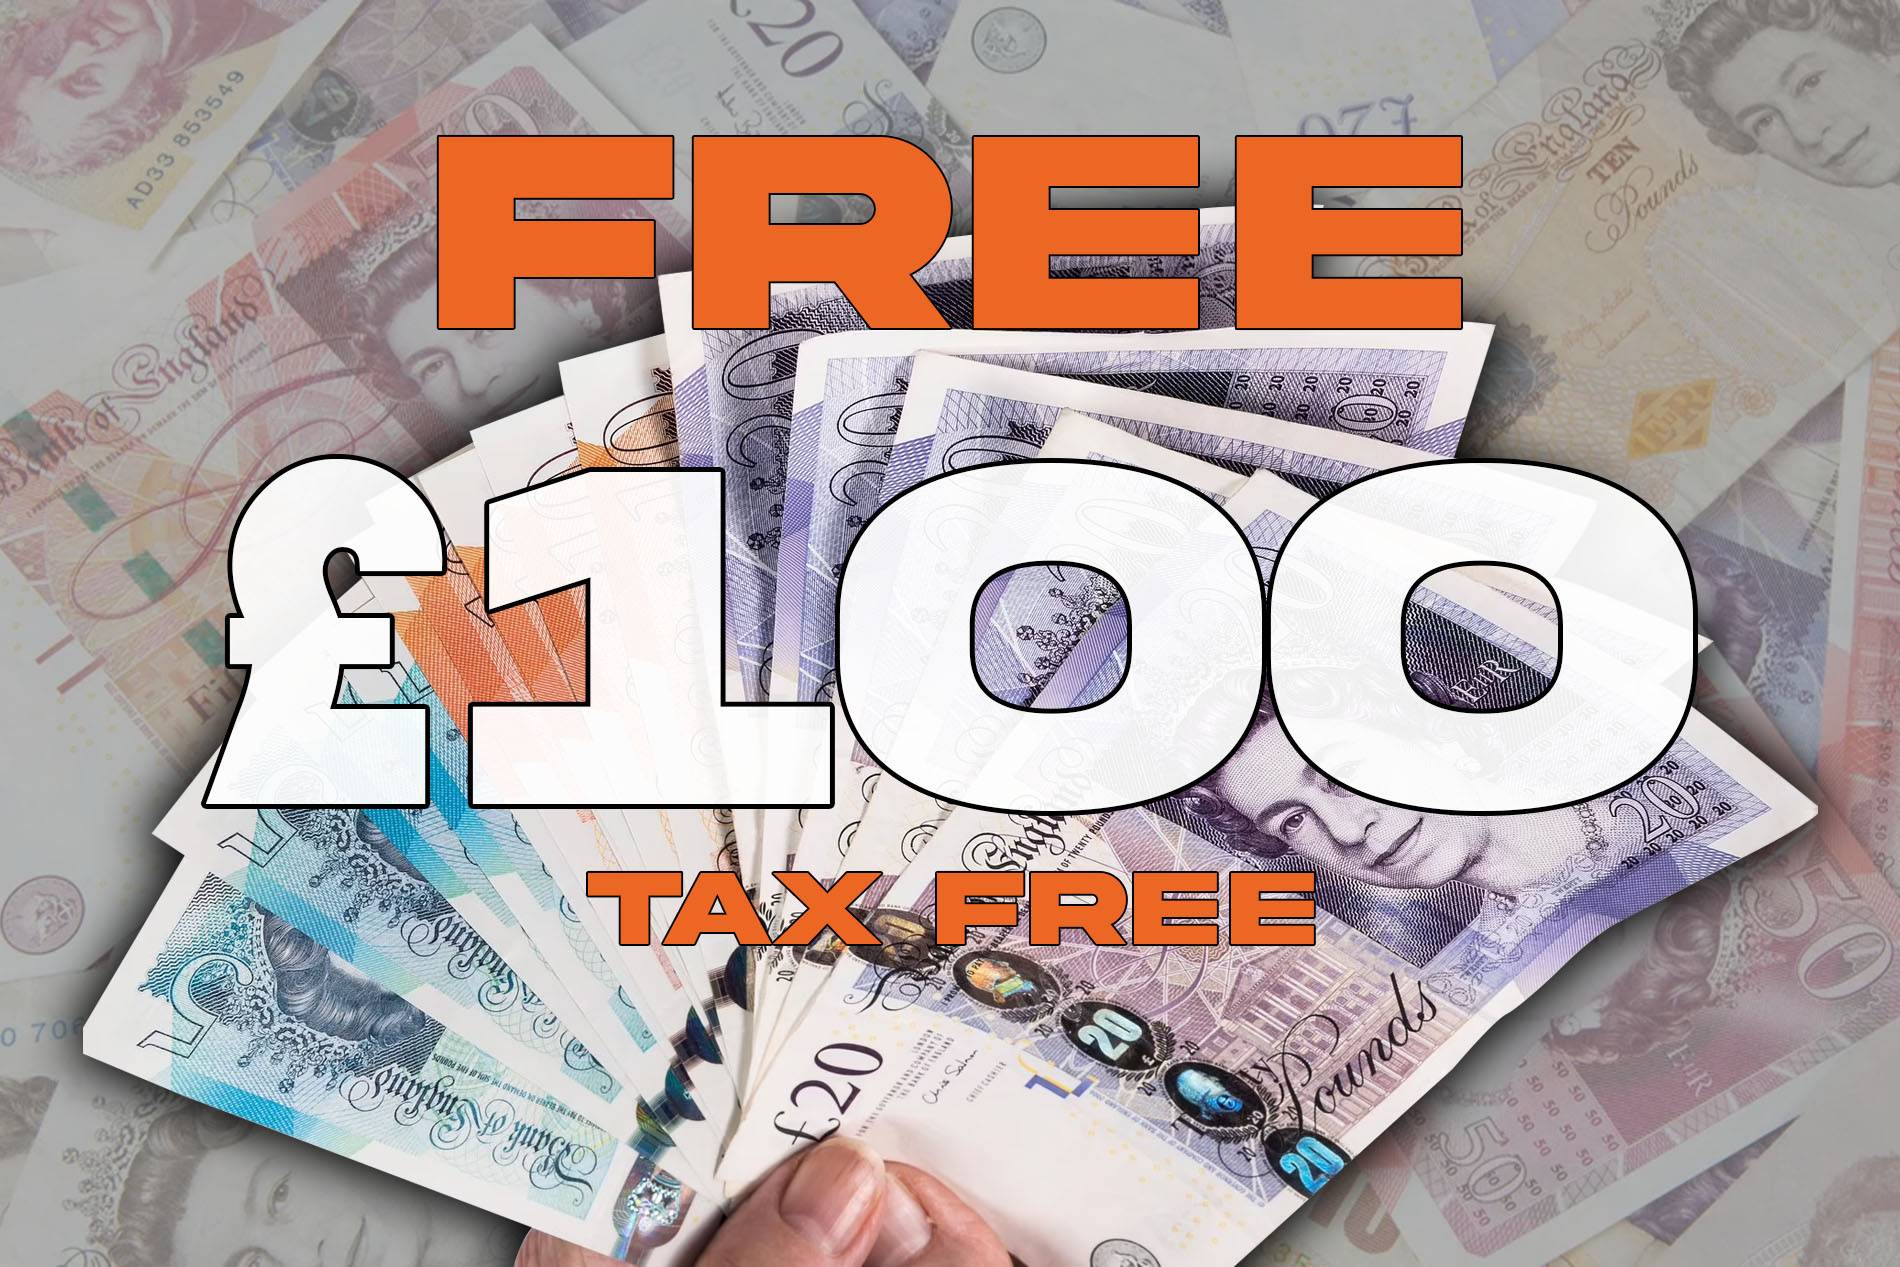 FREE: Chance to Win £100 Tax Free Cash (Spend 1+ and Triple to £300)